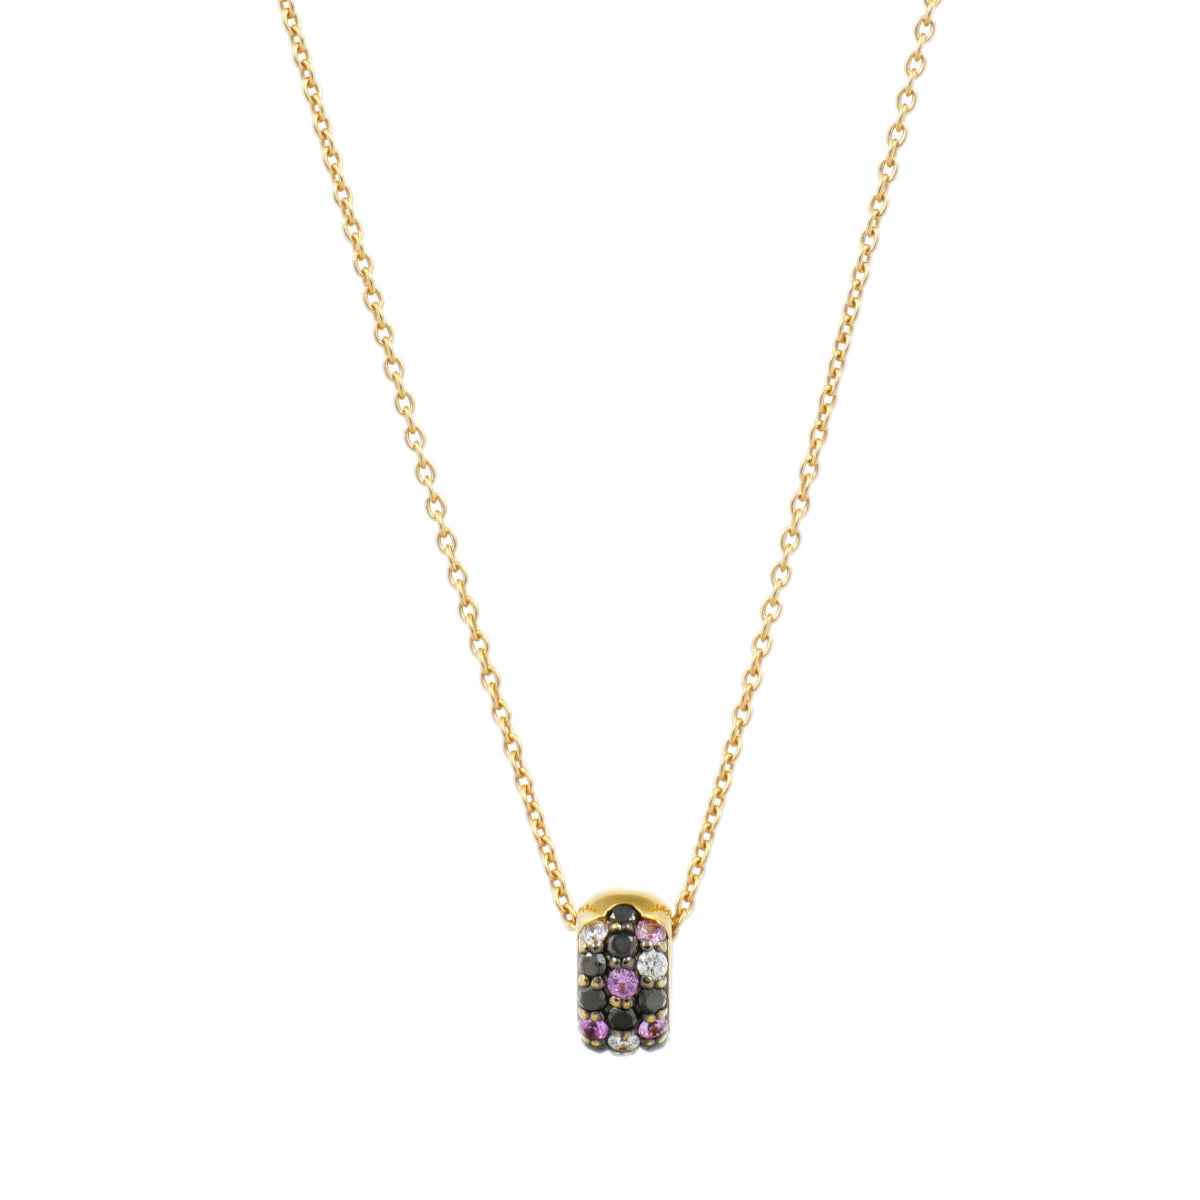 [LuxUness]  PonteVecchio Eterno Rotondo Necklace in K18 Yellow Gold with 0.02ct D, 0.04ct S & 0.10ct Black Diamond, Ladies' - Used in Excellent condition